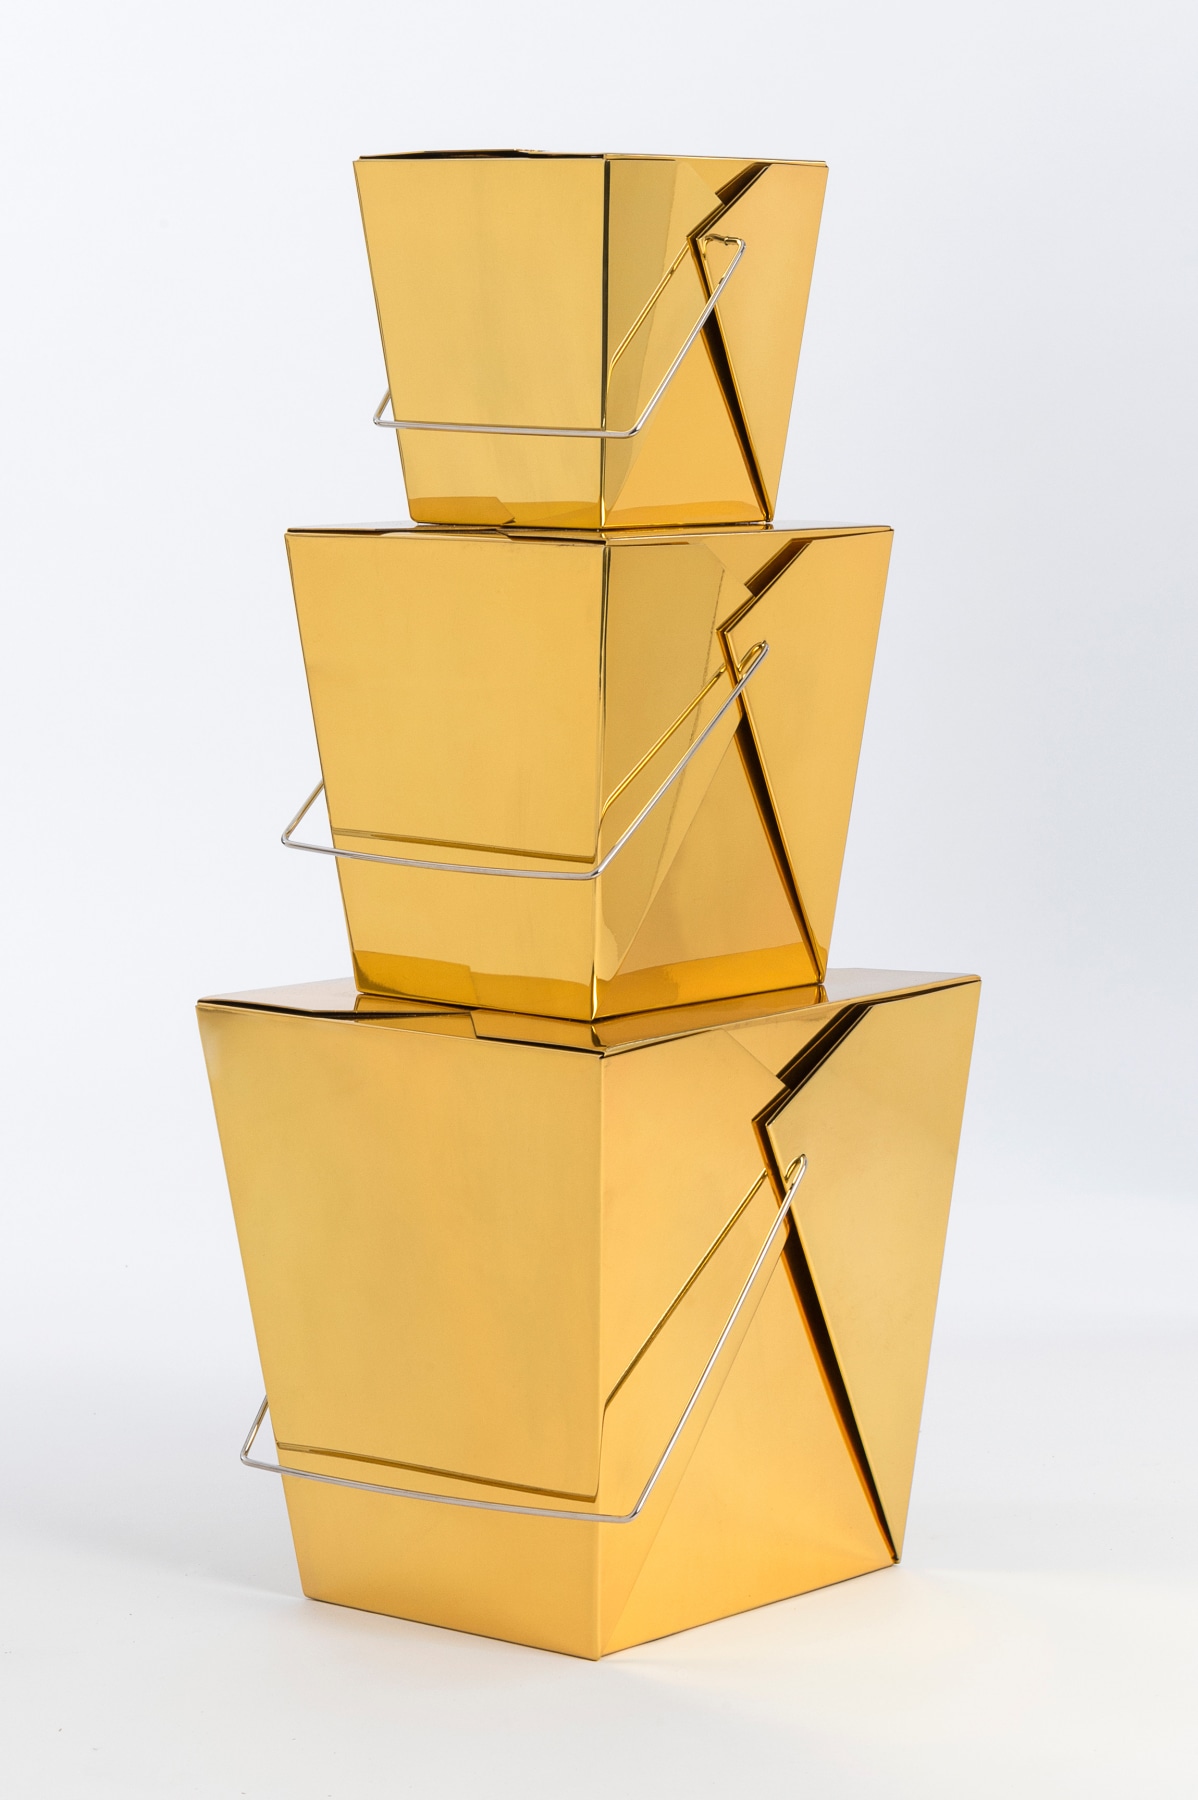 Jonathan Seliger  Golden Pavilion, 2012  gold plated polished bronze, lacquer and nickel plated bronze rod  32 x 16 x 13 inches   Houston Airport System Art Collection